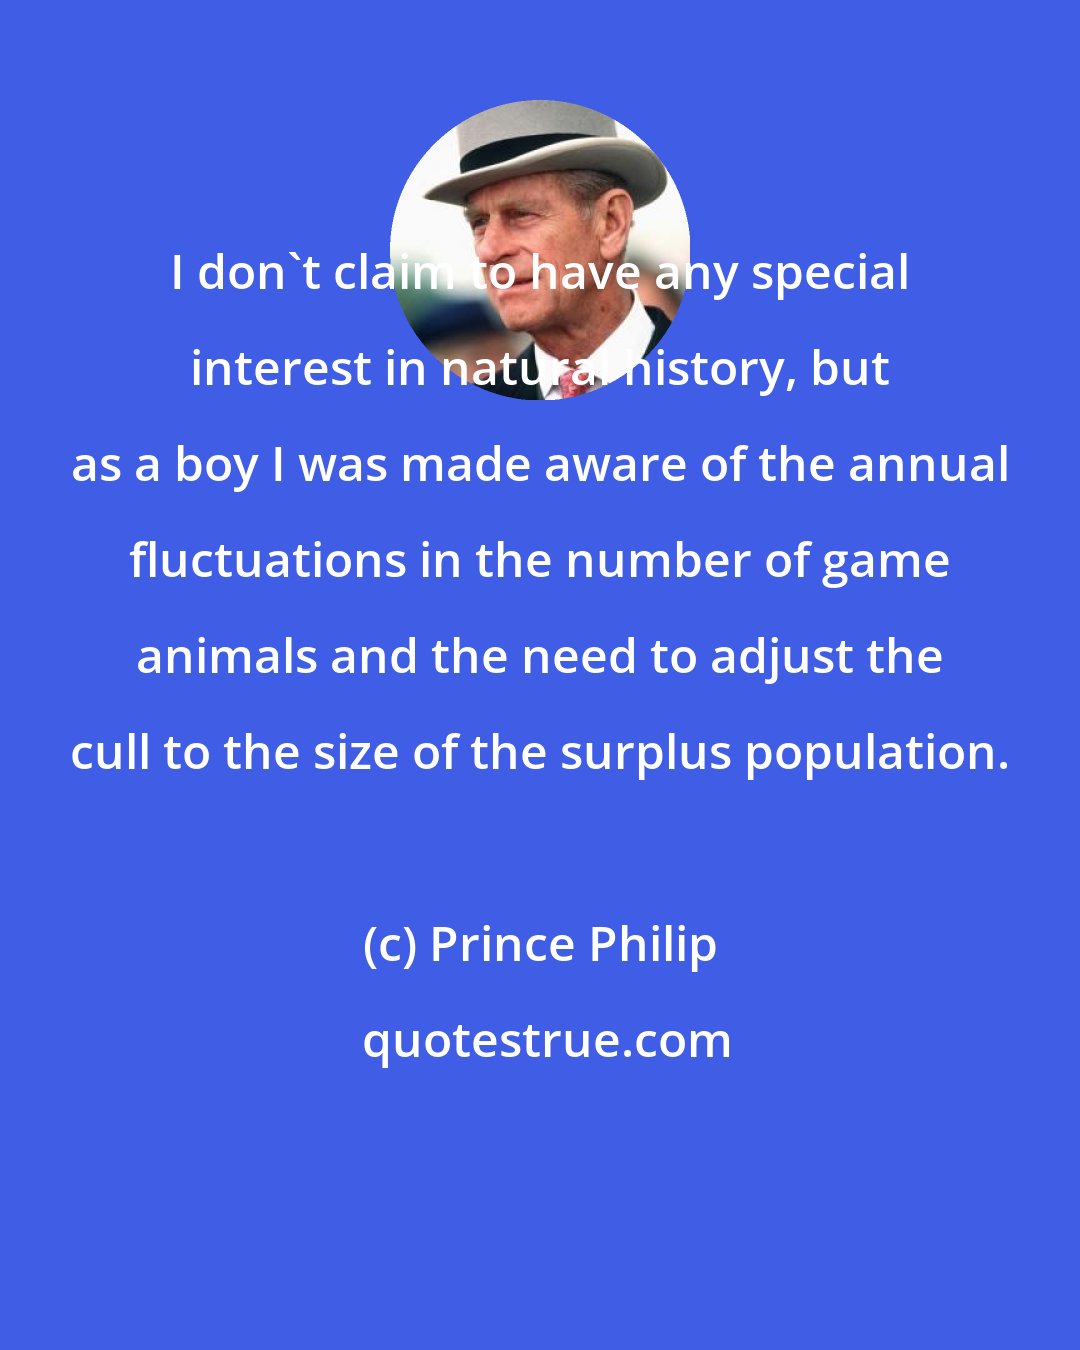 Prince Philip: I don't claim to have any special interest in natural history, but as a boy I was made aware of the annual fluctuations in the number of game animals and the need to adjust the cull to the size of the surplus population.